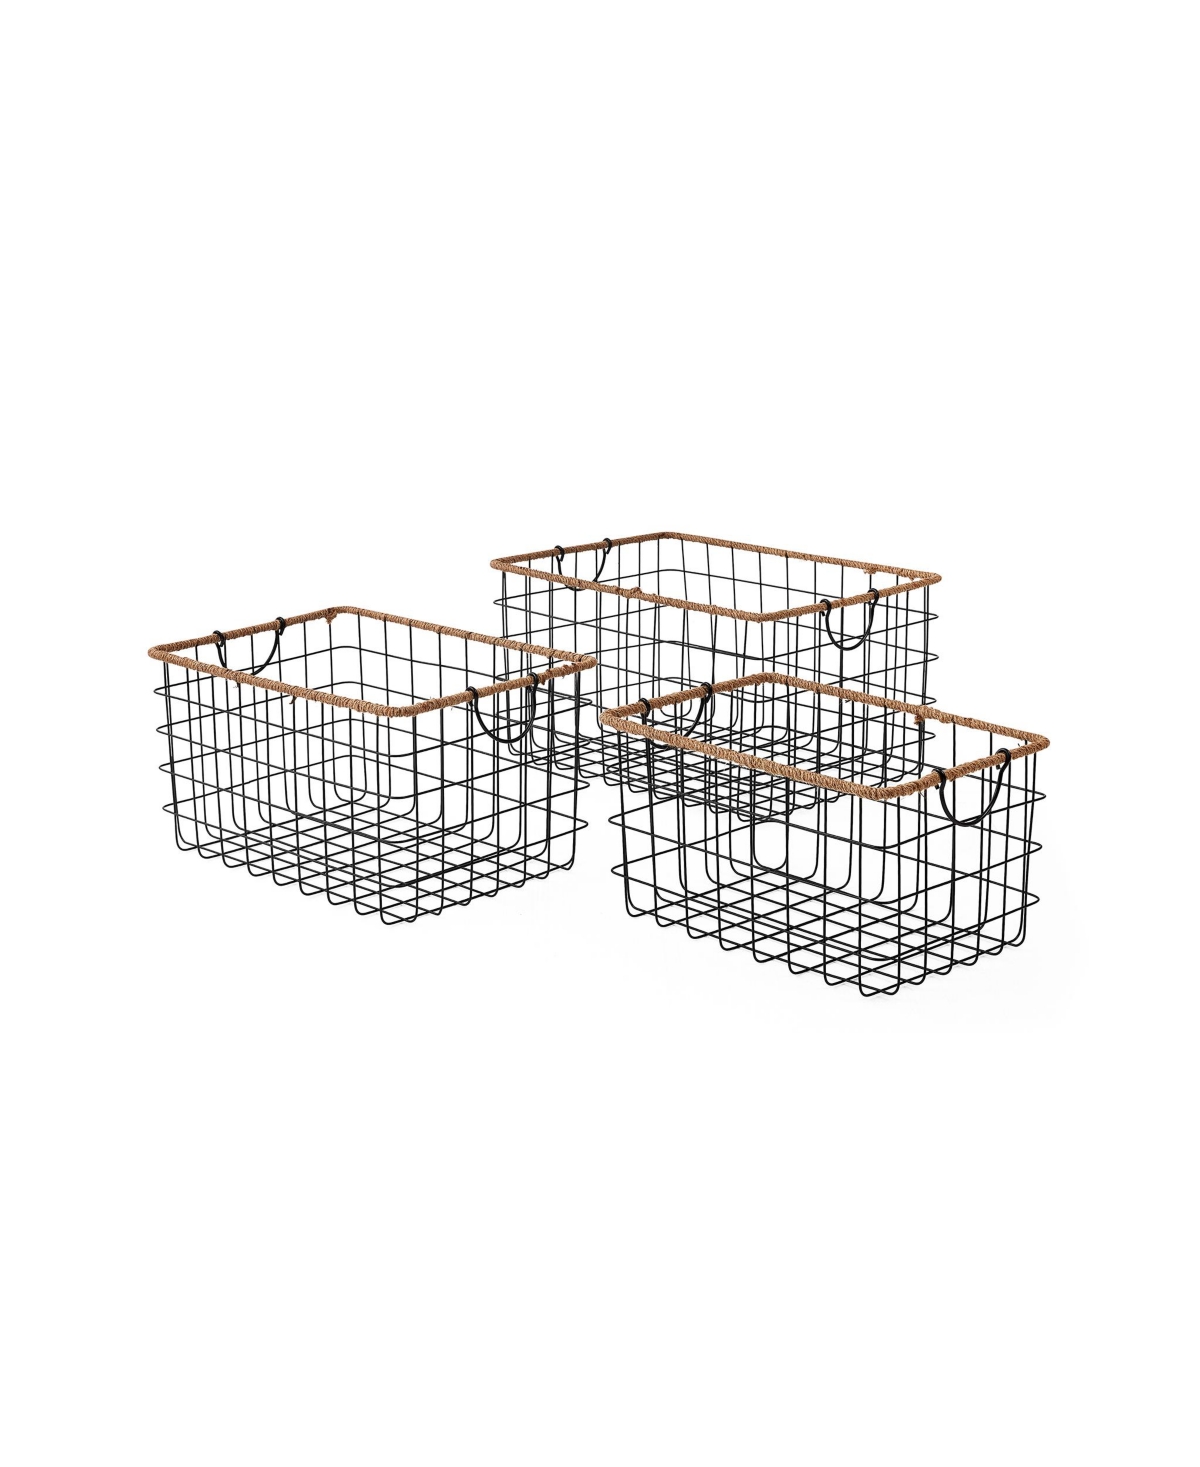 Rectangular Grid Black Wire Baskets with Jute Rim and Fold Down Ear Handles, Set of 3 - Black, Natural